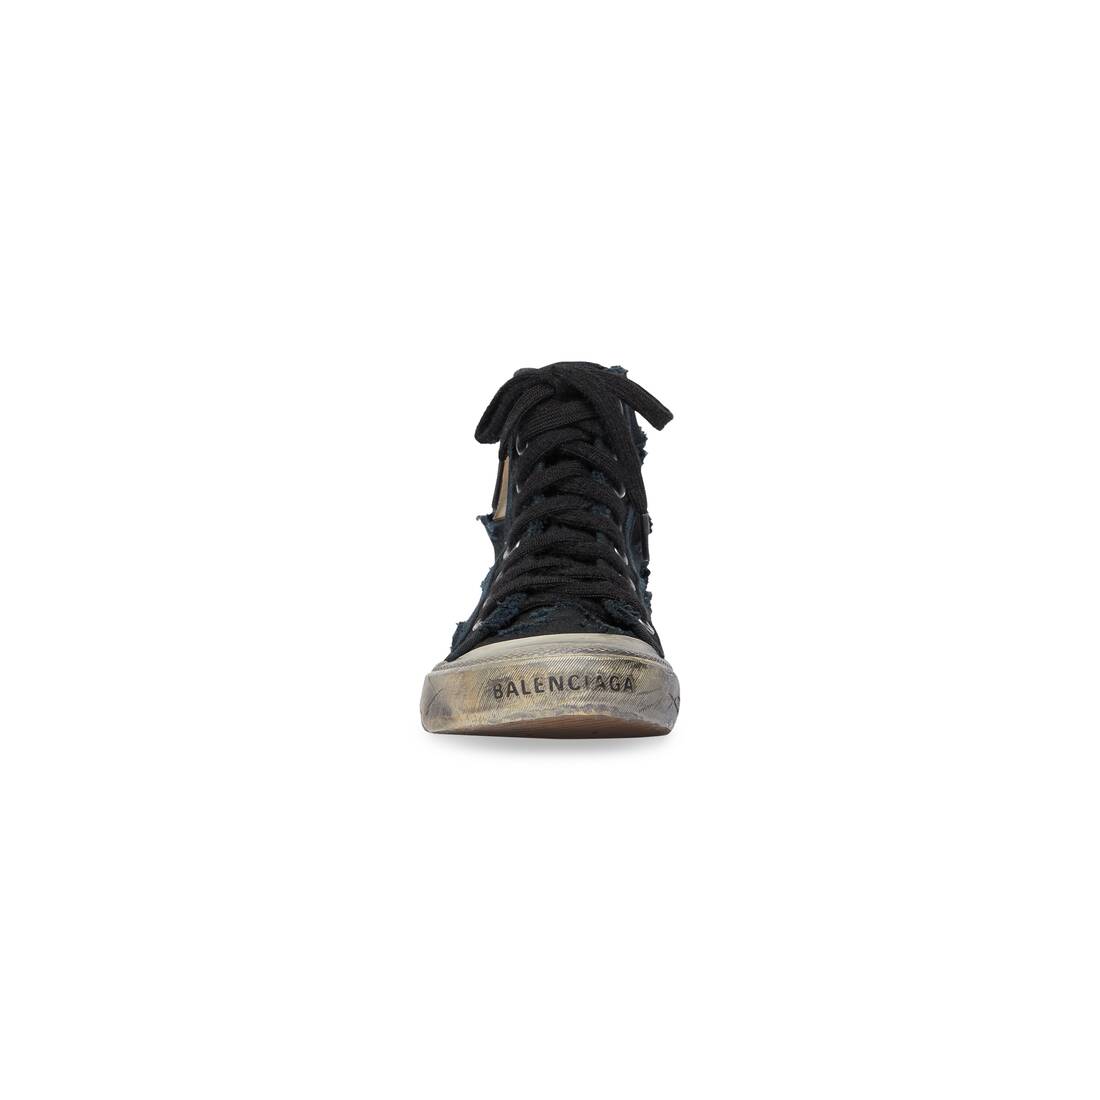 limited edition – paris high top sneaker full destroyed